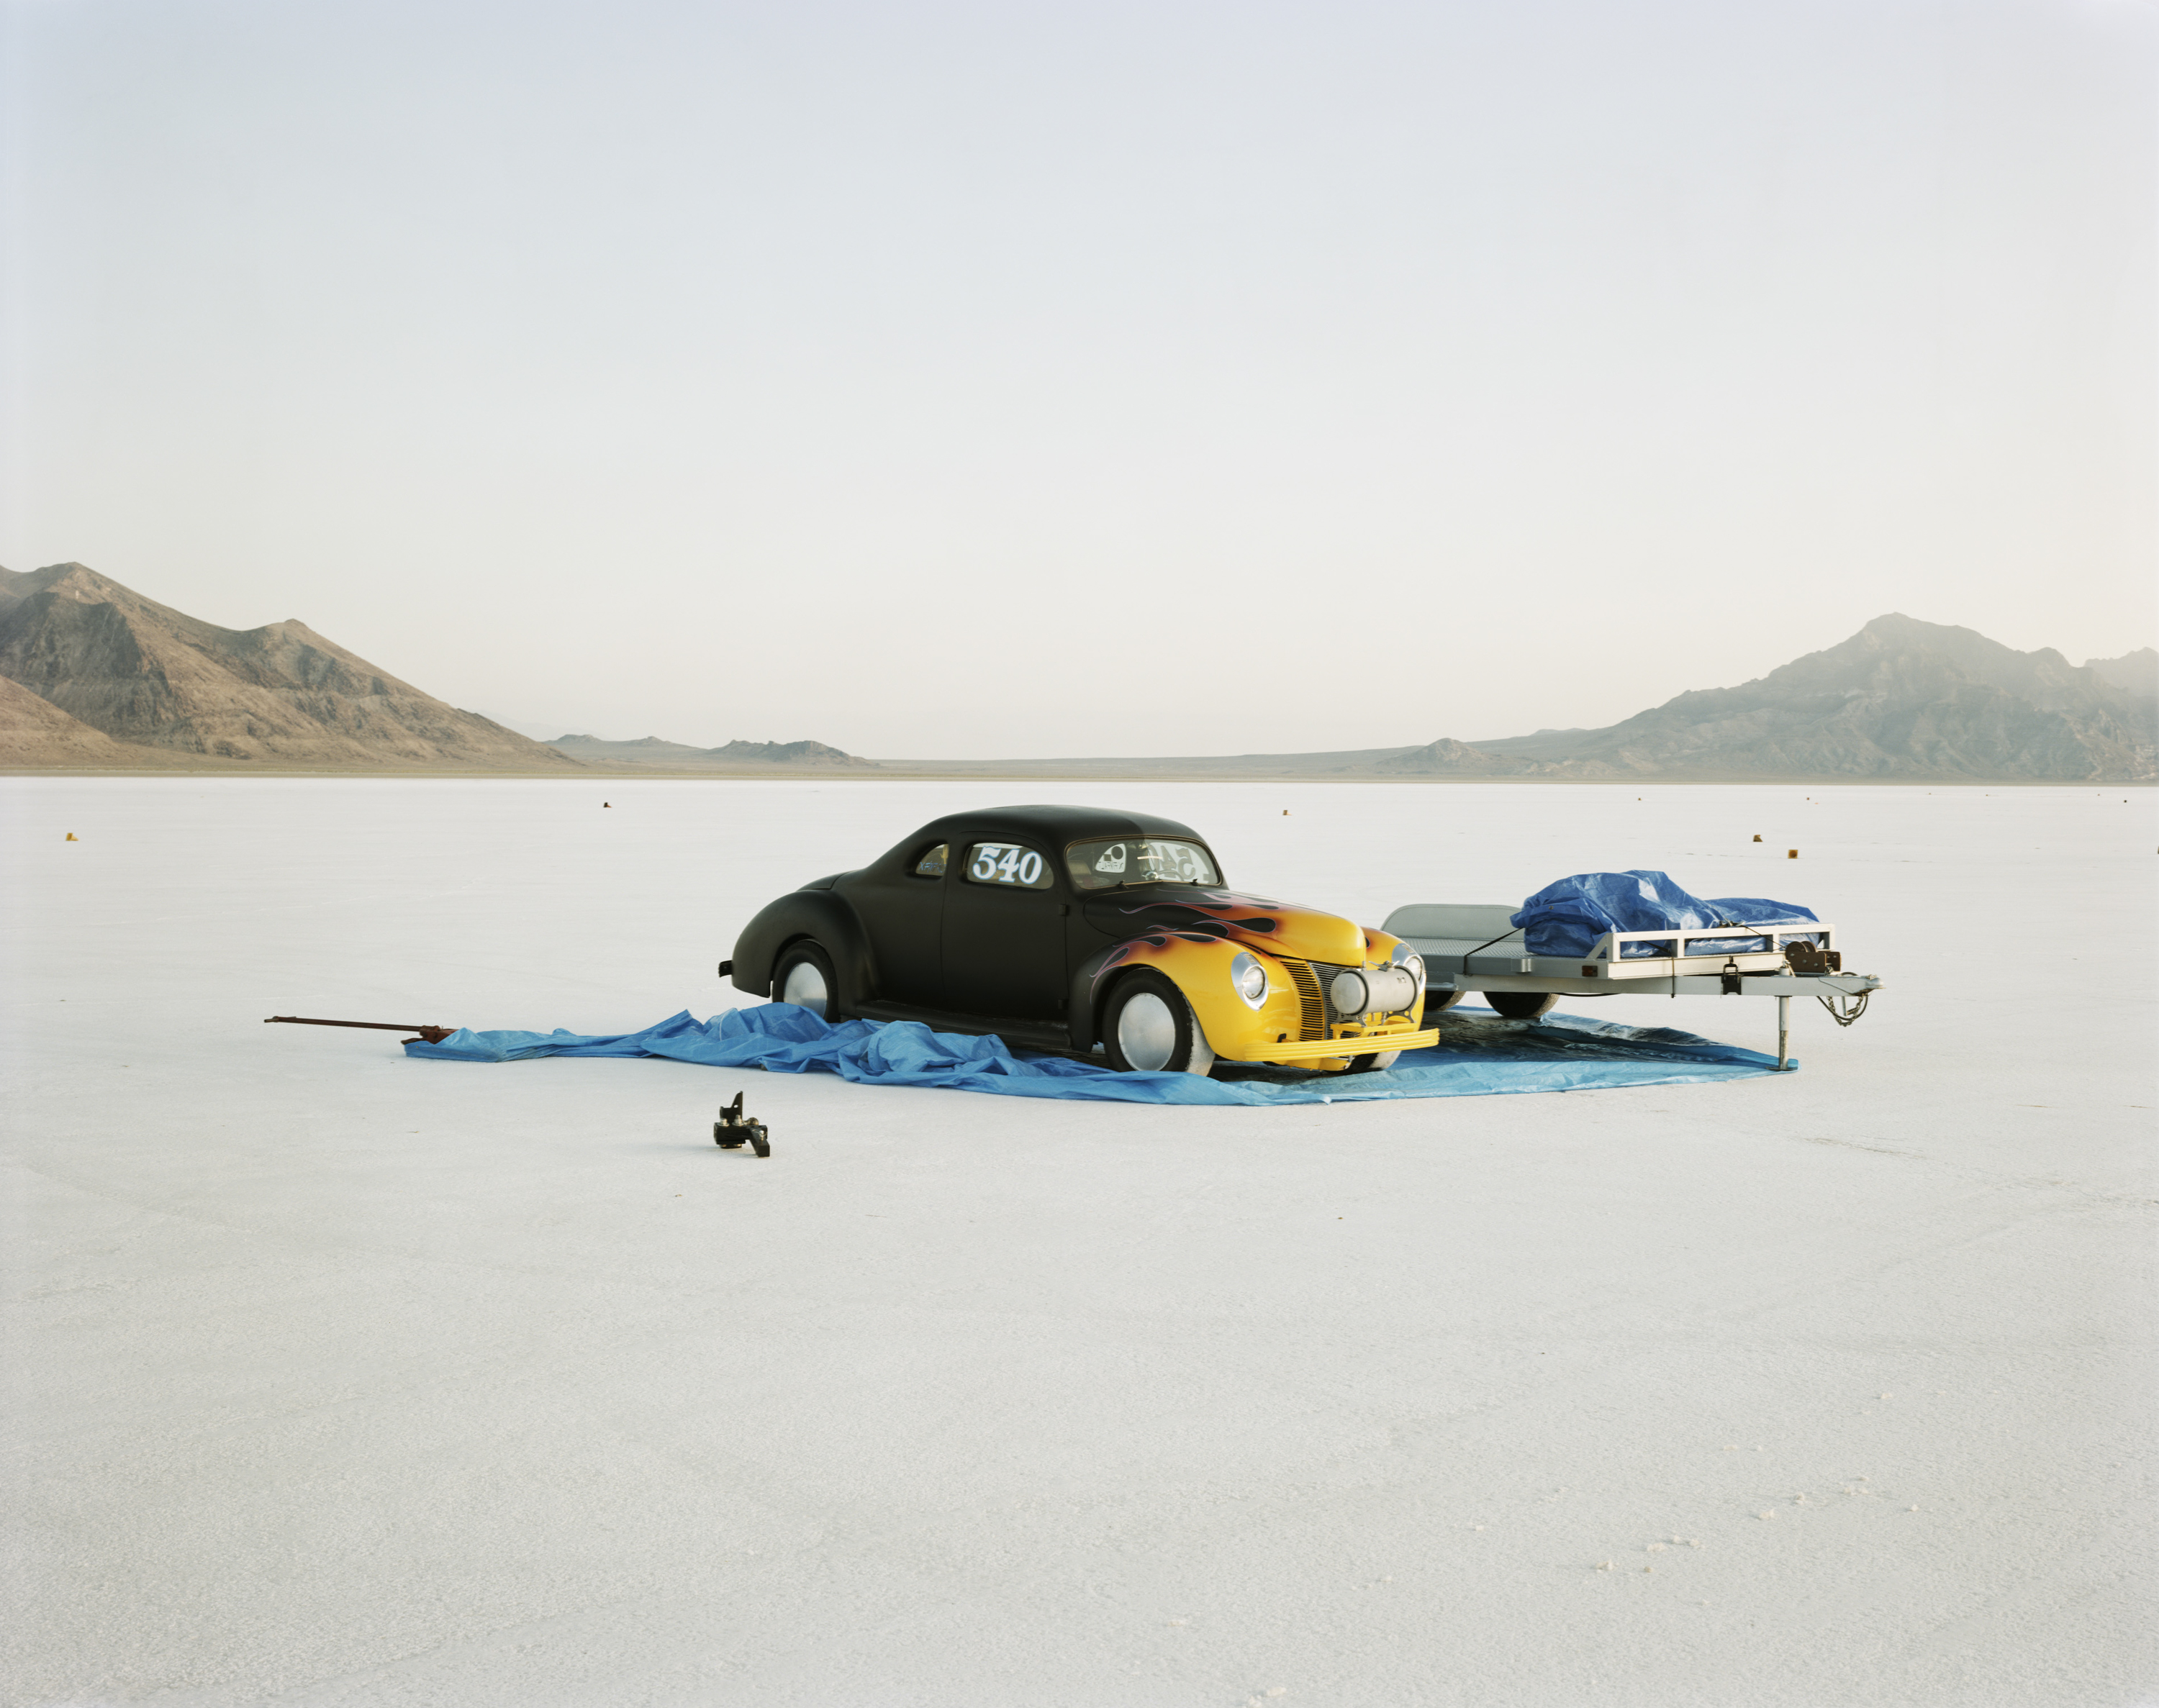 Color photograph of a car with flames painted on the front in the middle of empty salt flats with mountains on horizon